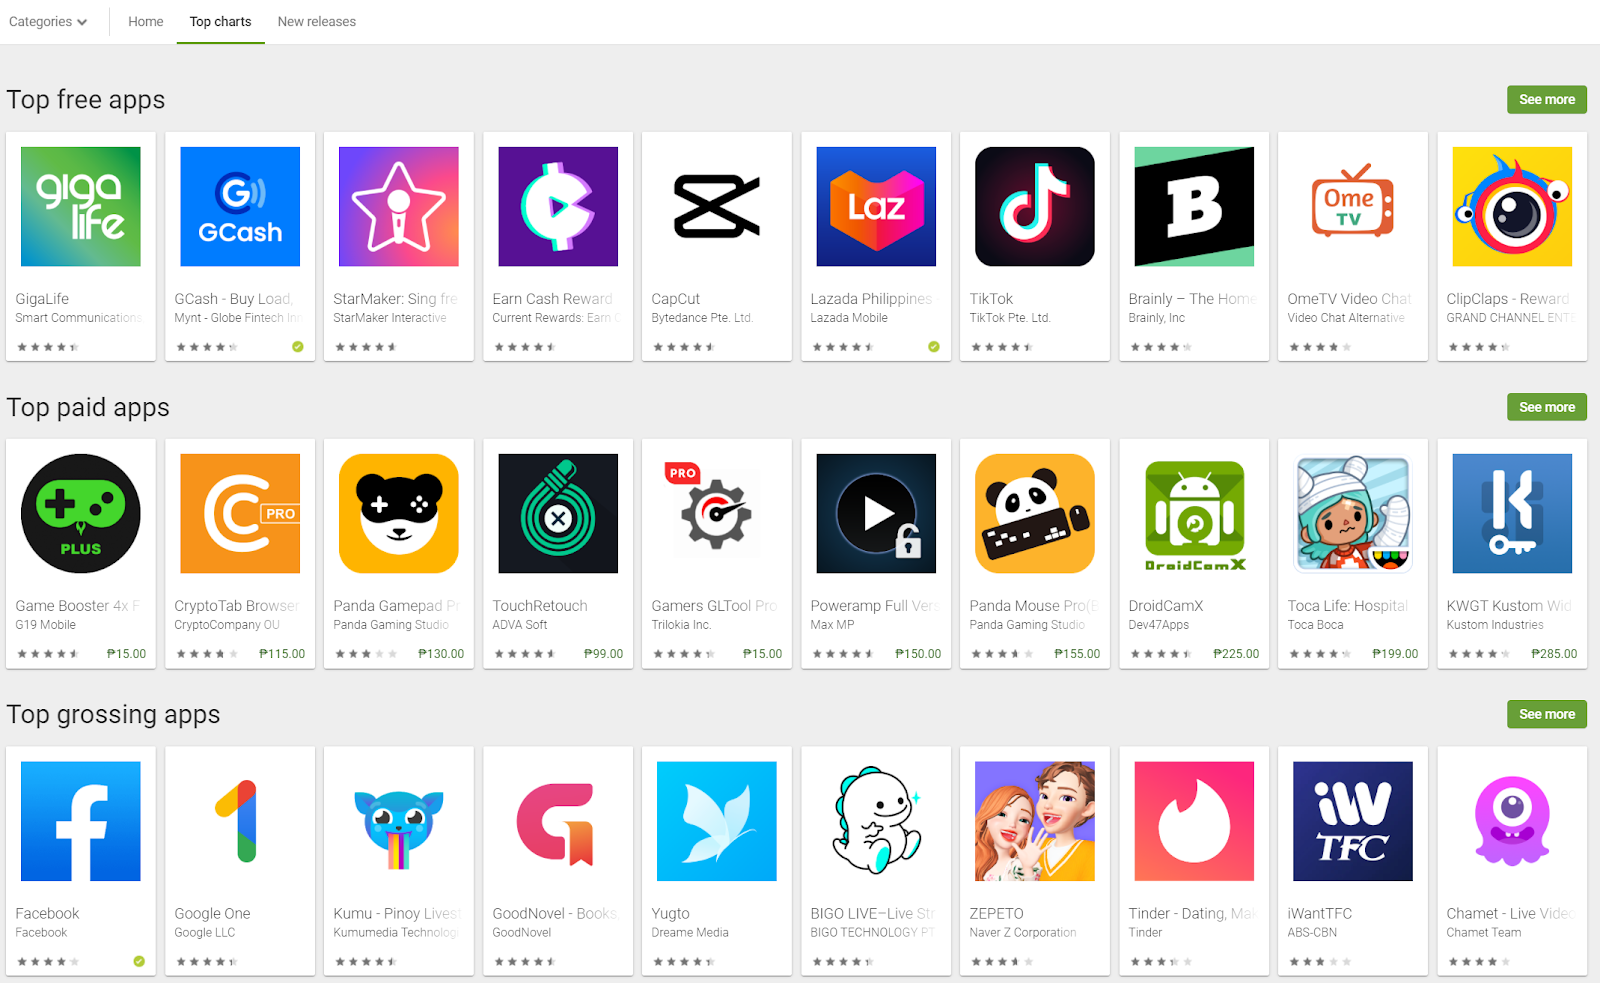 Top charts of Google Play Store.